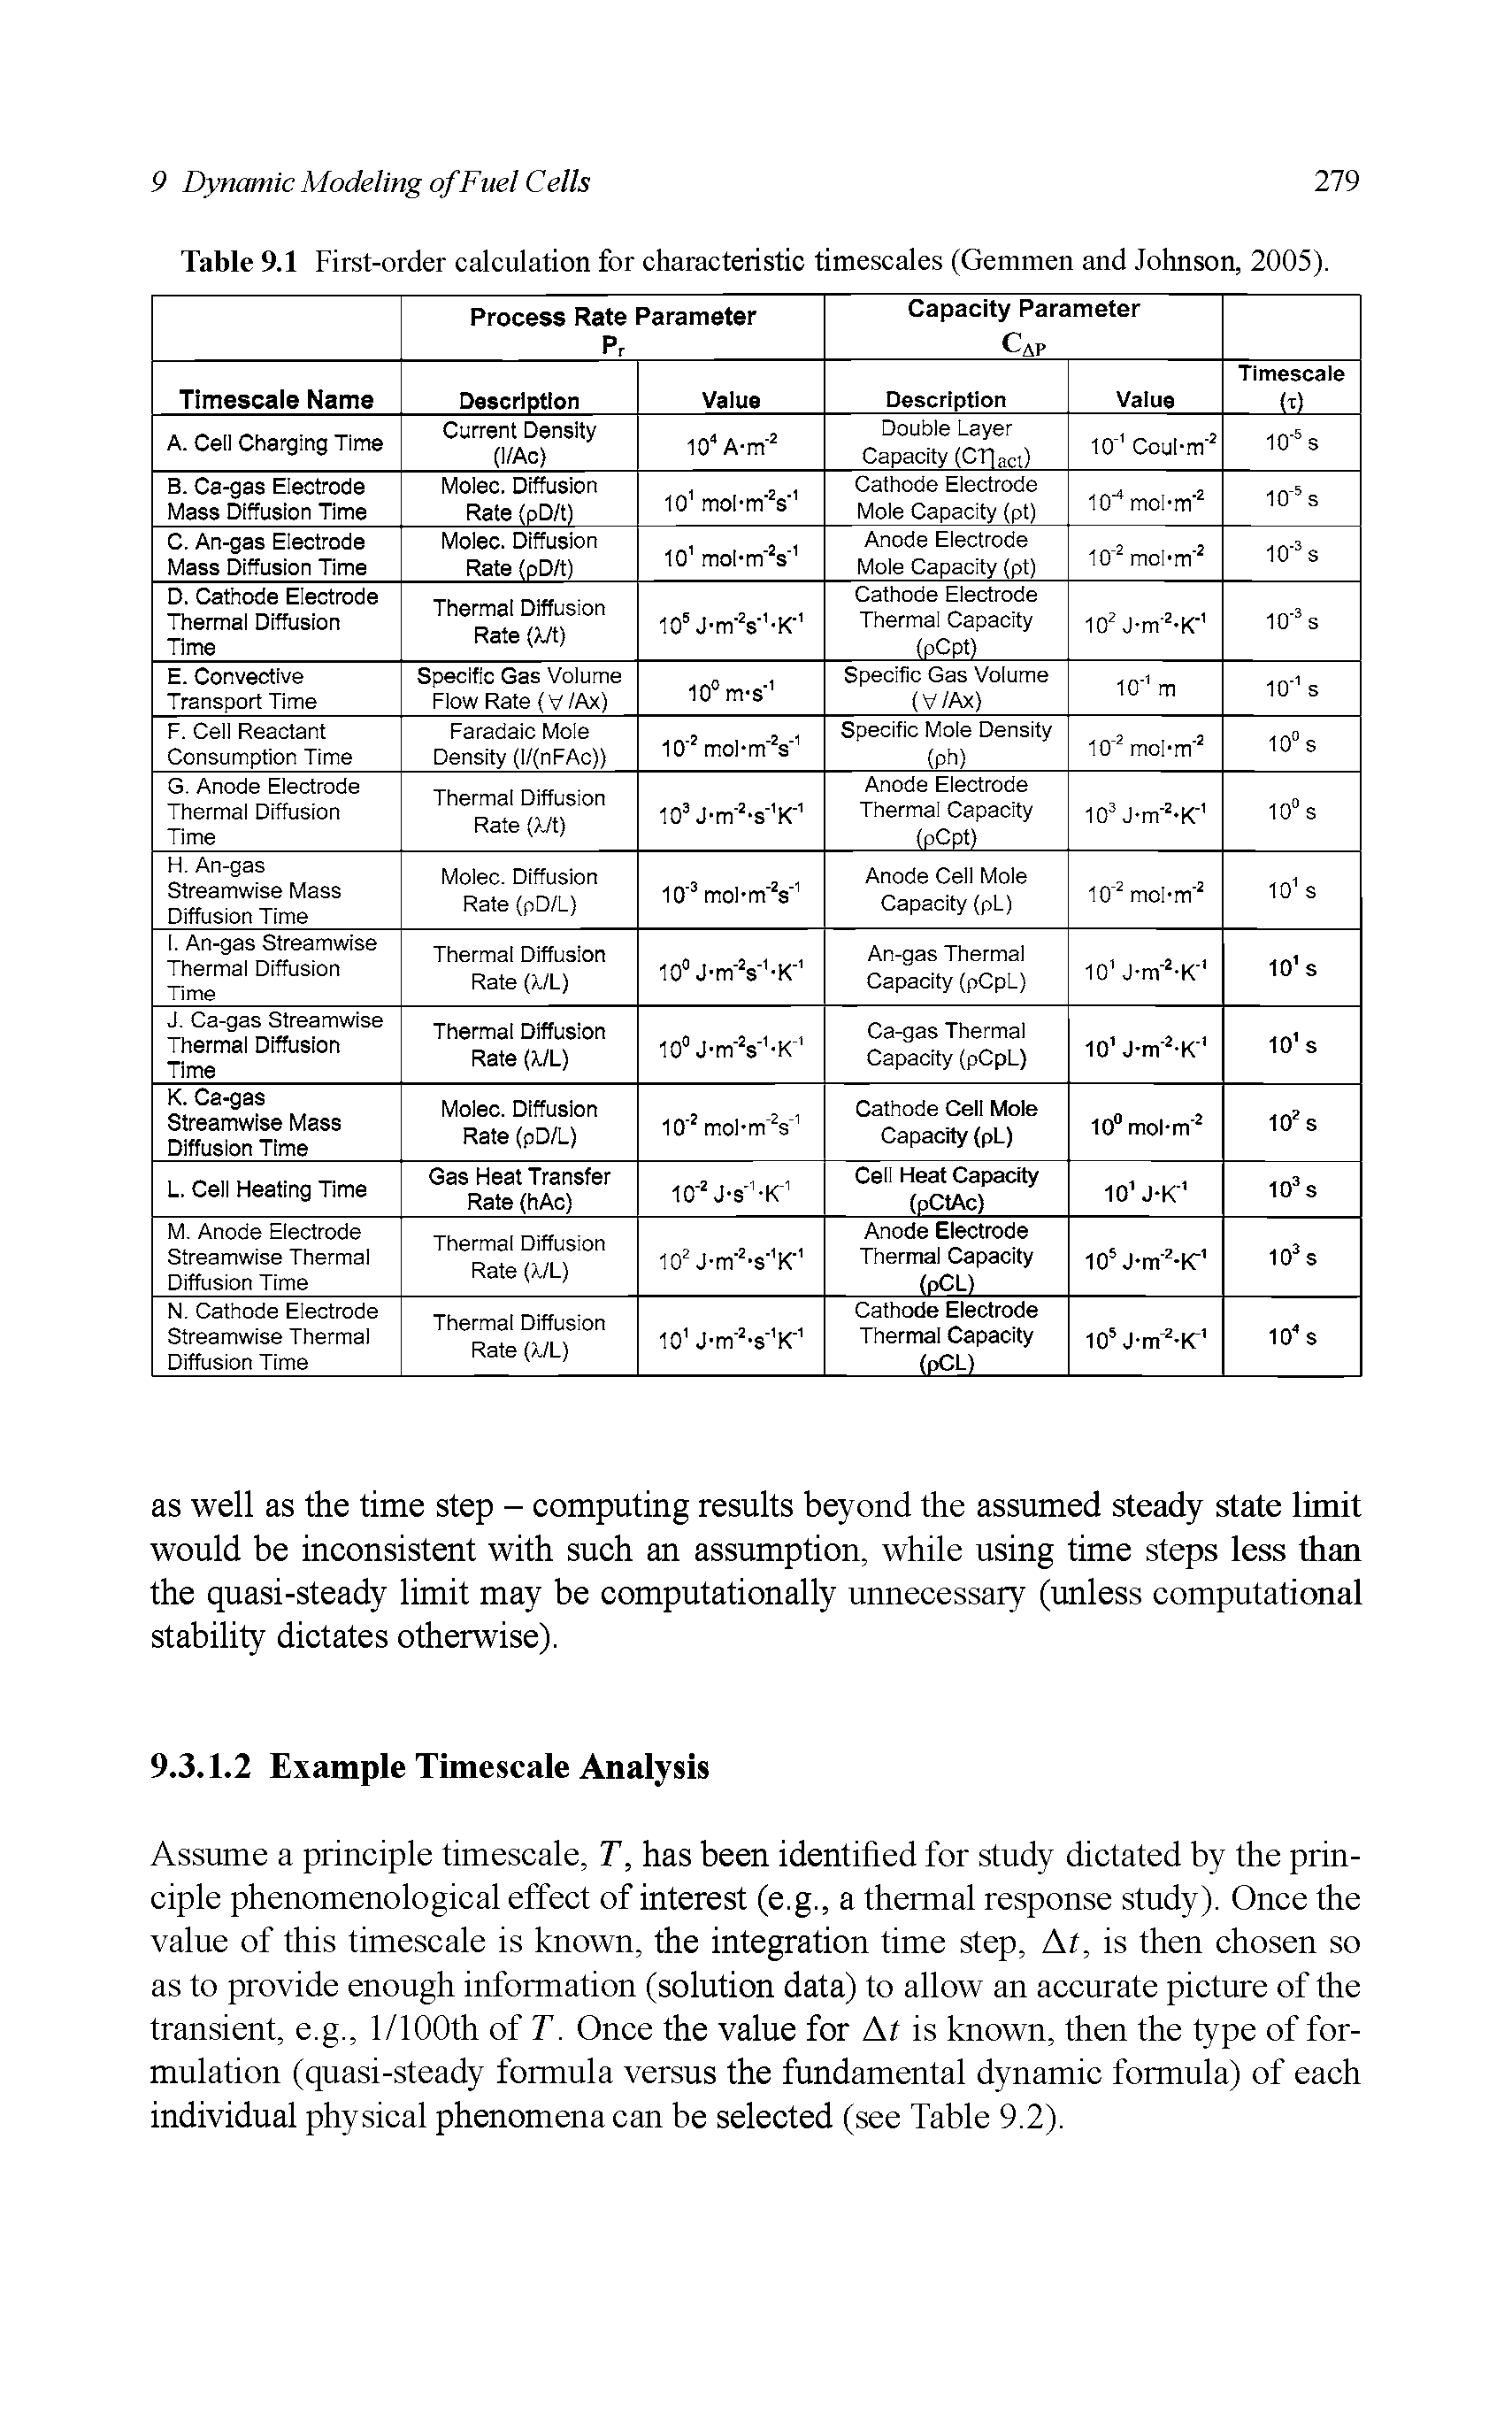 Table 9.1 First-order calculation for characteristic timescales (Gemmen and Johnson, 2005).